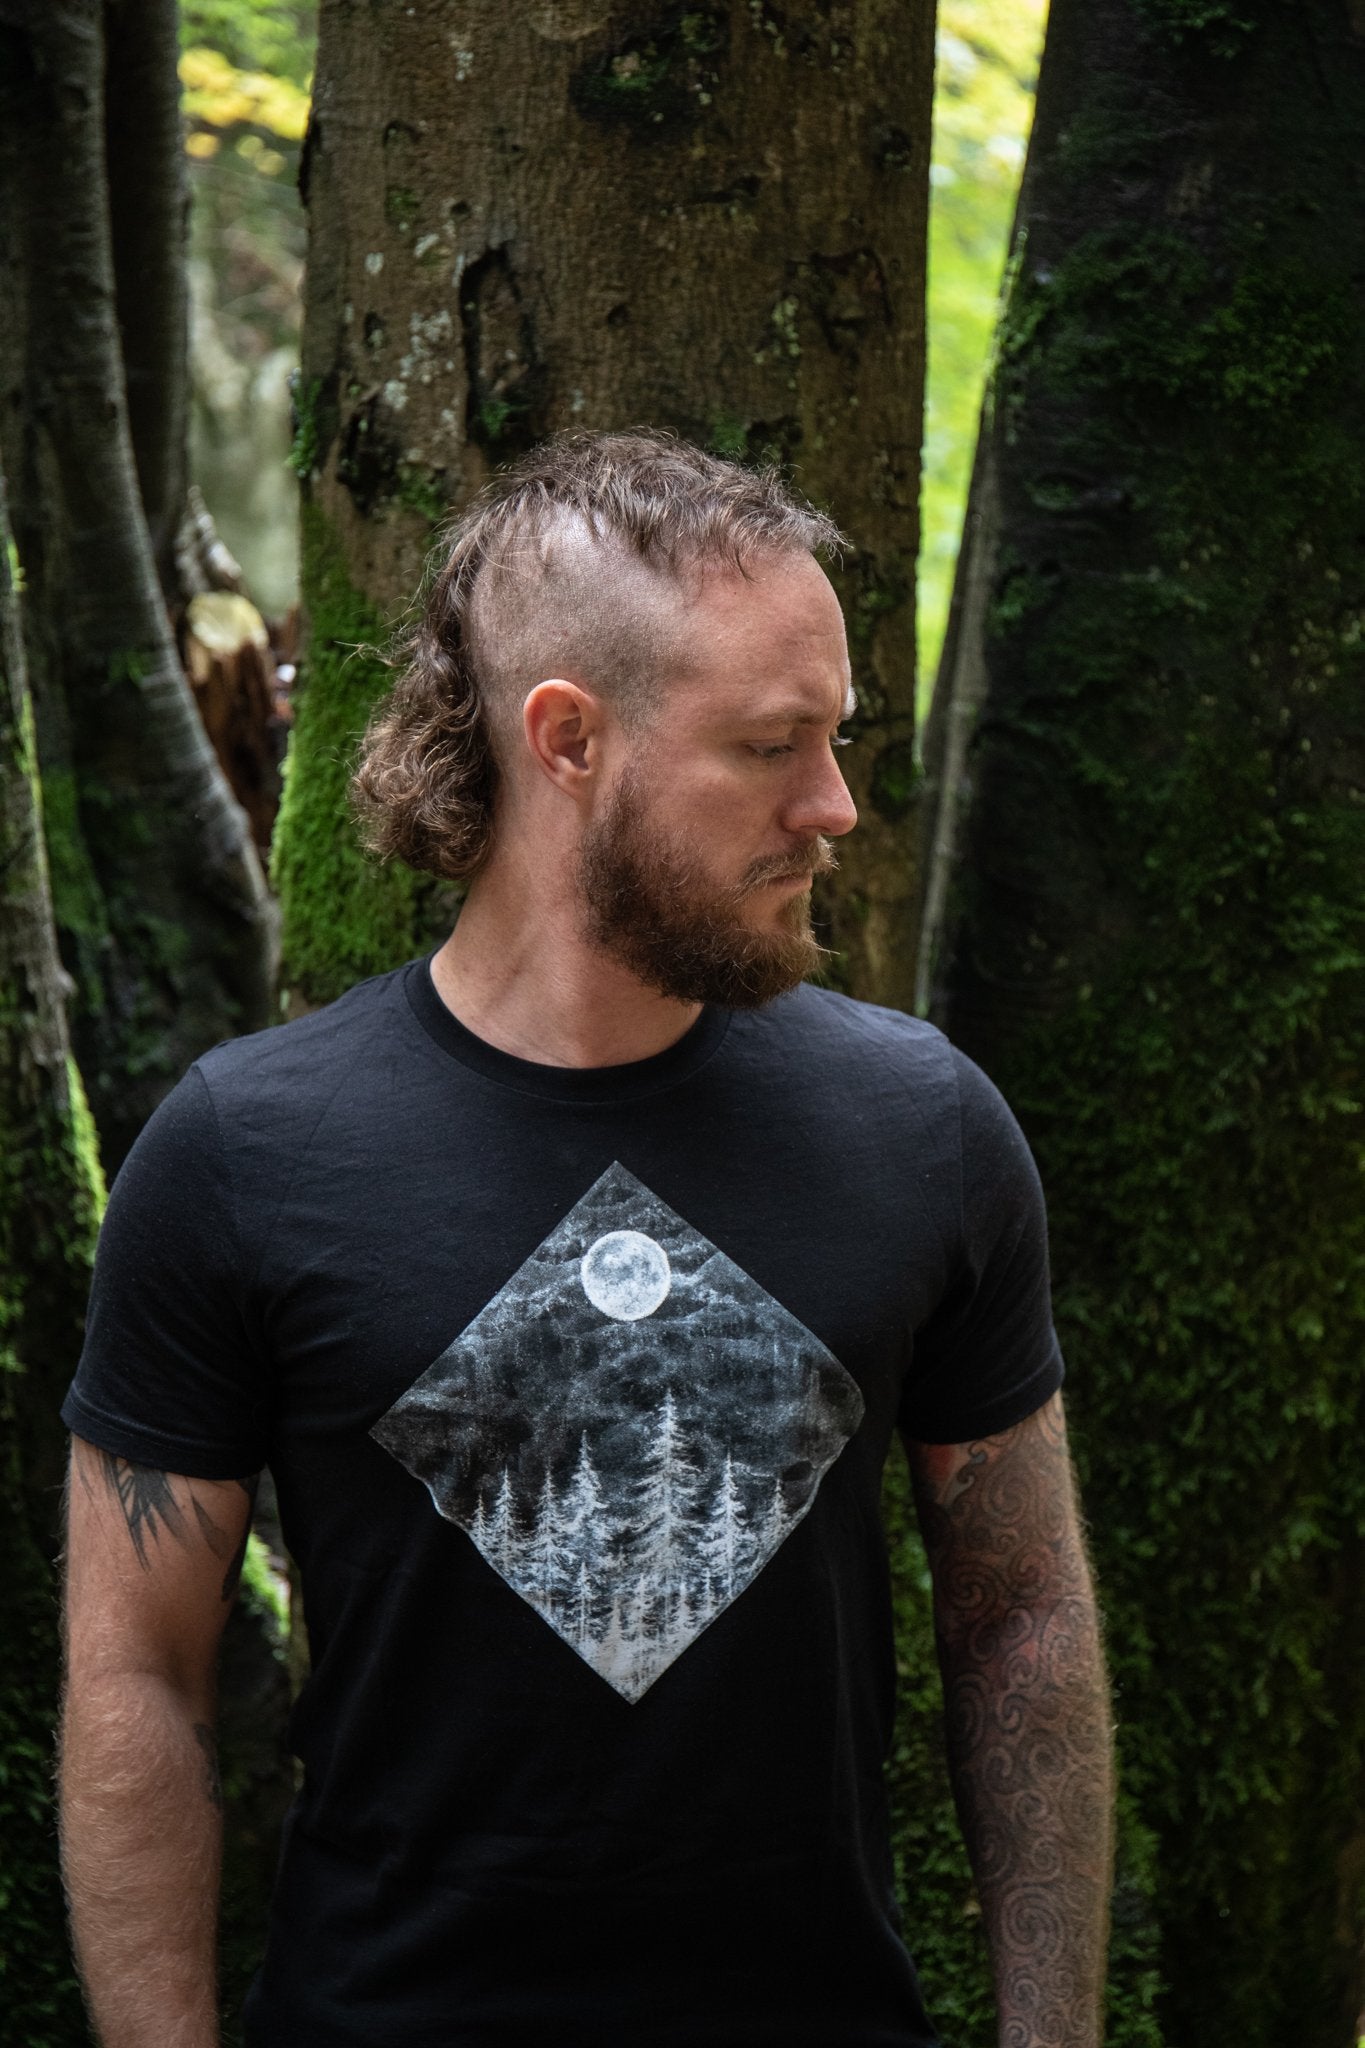 Descended from Odin, Organic T-shirts, Staithes Hoodie, Merino Wool Hoodie, Odin, TYR, Thor, Ragnar, Bjorn Ironside, Vikings, Anglo Saxon, Norse, Fitness Gear, Horns, Jewellery, Silver